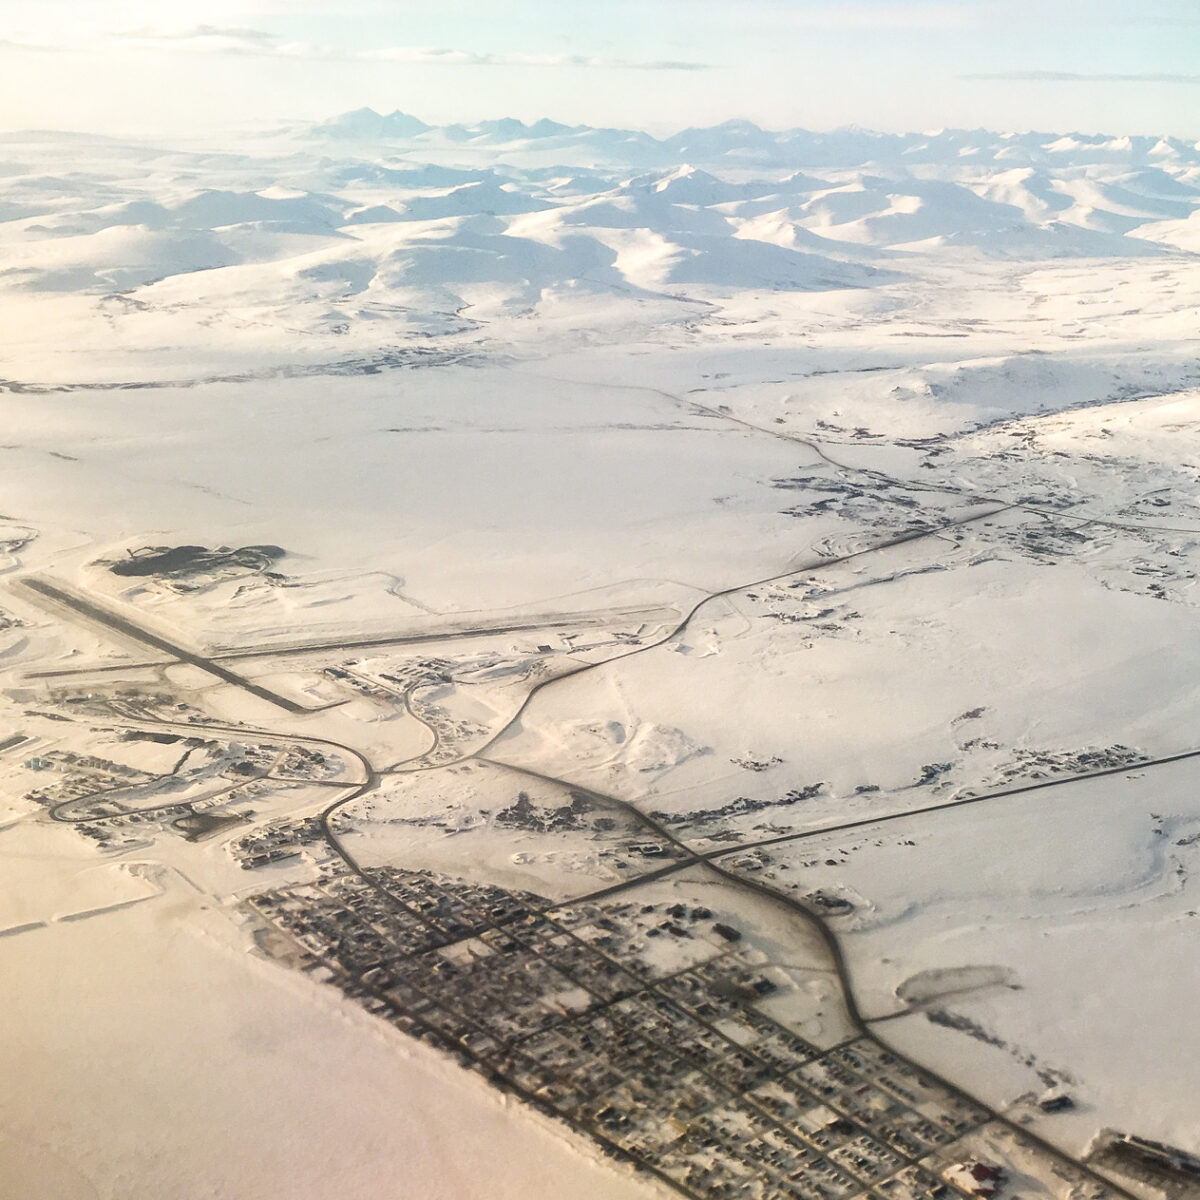 An aerial view of Nome, Alaska, and the surrounding countryside.